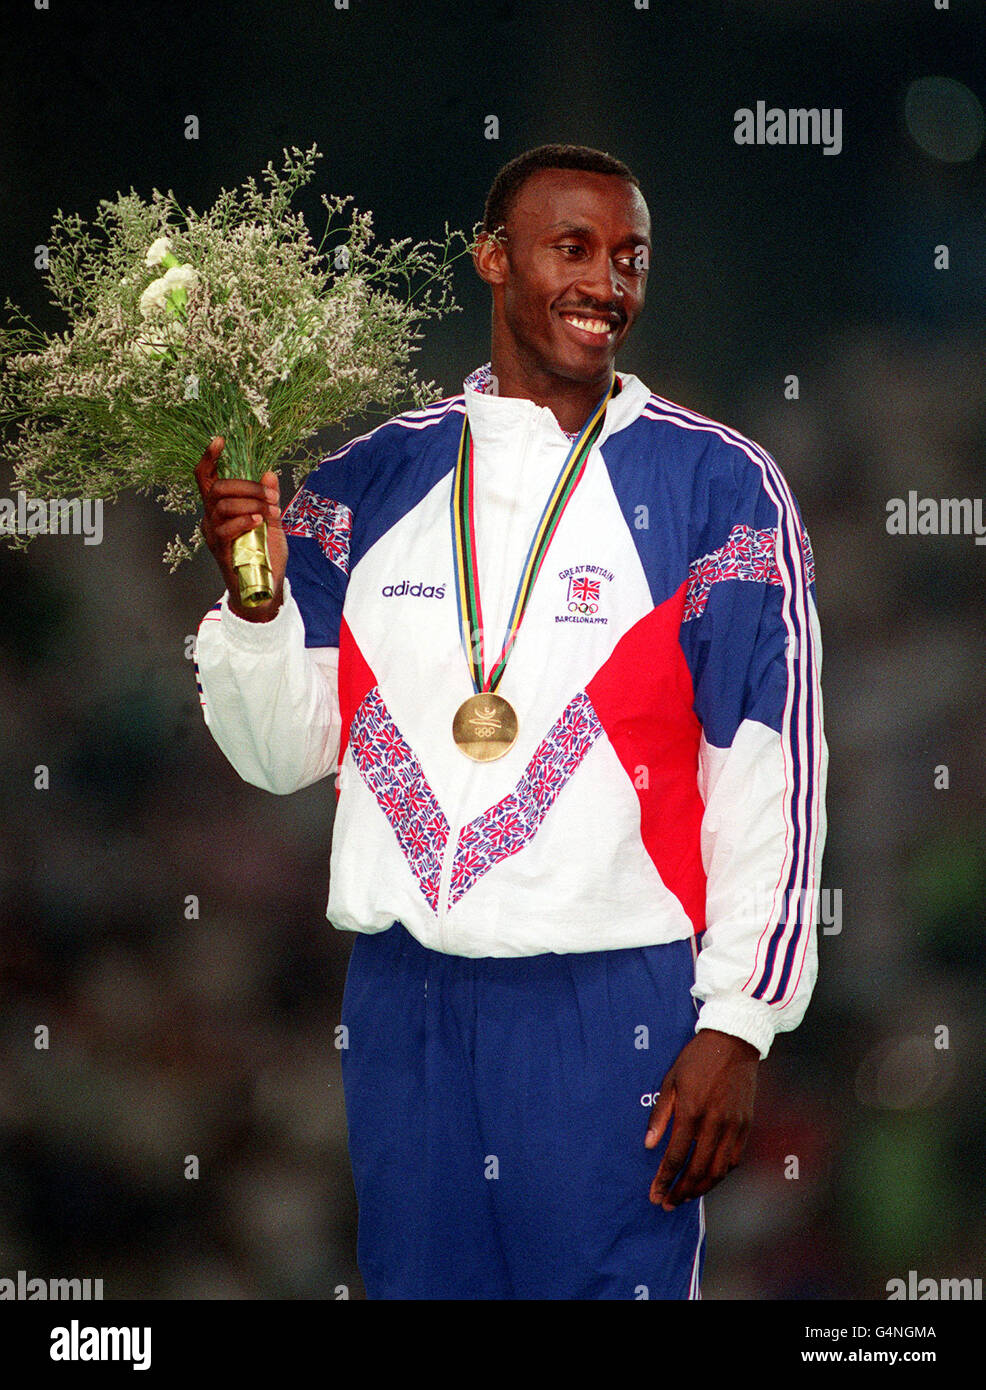 British athlete Linford Christie with his Gold Medal after his victory in the 100m final, at the 1992 Barcelona Olympic Games. 4/8/99: Christie failed a drugs test at an indoor meeting at Dortmund, Germany, on 13/2/99 it was confirmed. Stock Photo